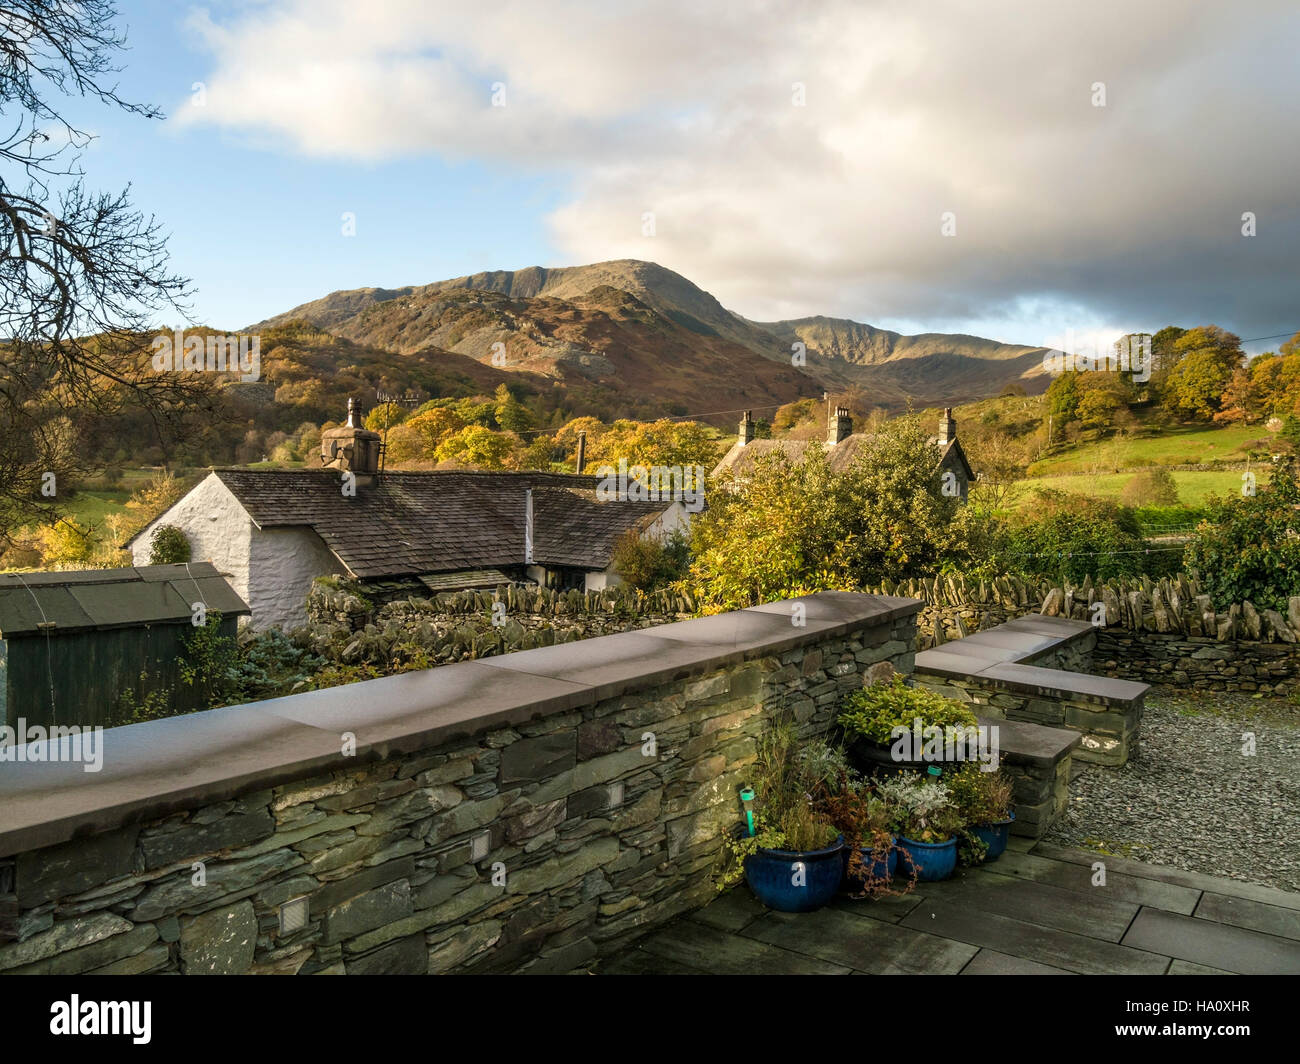 Dry stone wall and cottages in Little Langdale with Wetherlam beyond, English Lake District, Cumbria, England, UK. Stock Photo